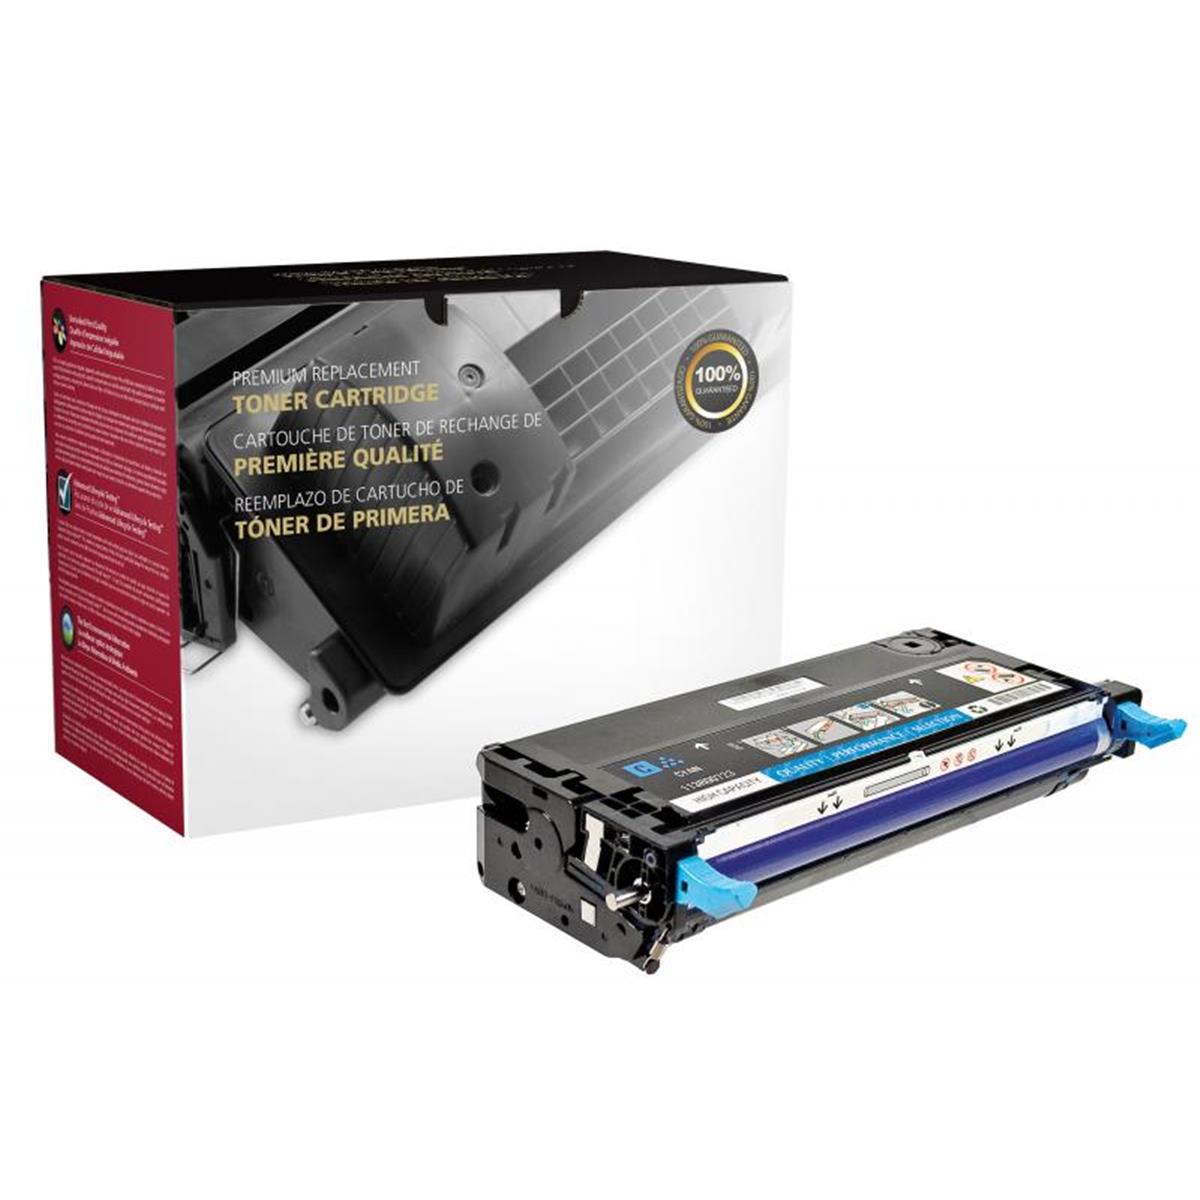 Picture of Dell 200504 High Yield Cyan Toner Cartridge for Dell 3130